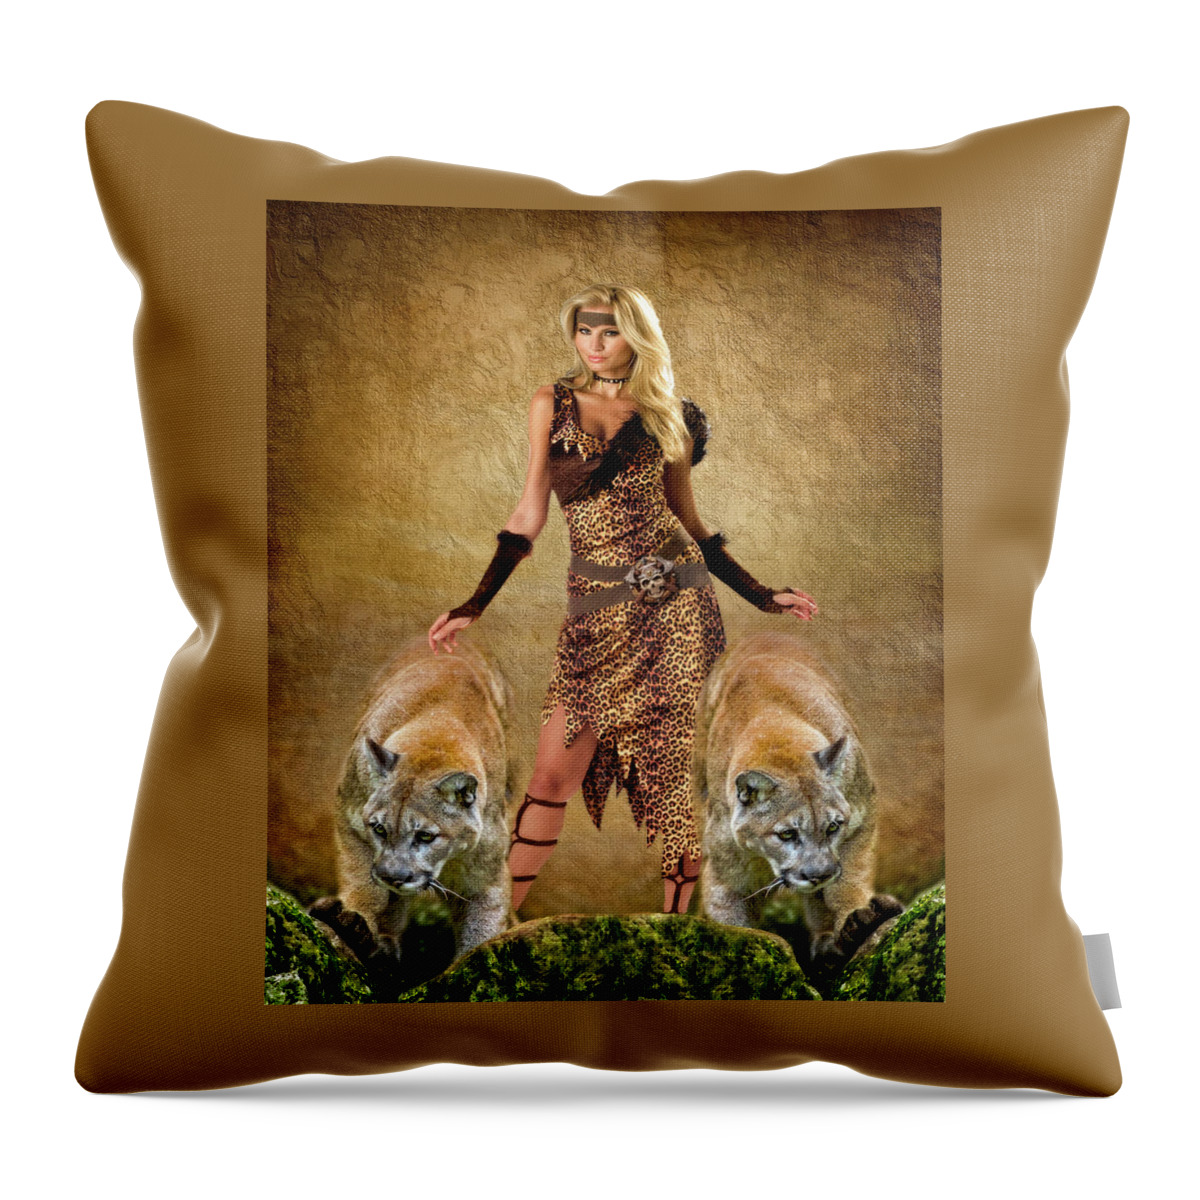 2d Throw Pillow featuring the digital art Two Pumas And A Cougar by Brian Wallace